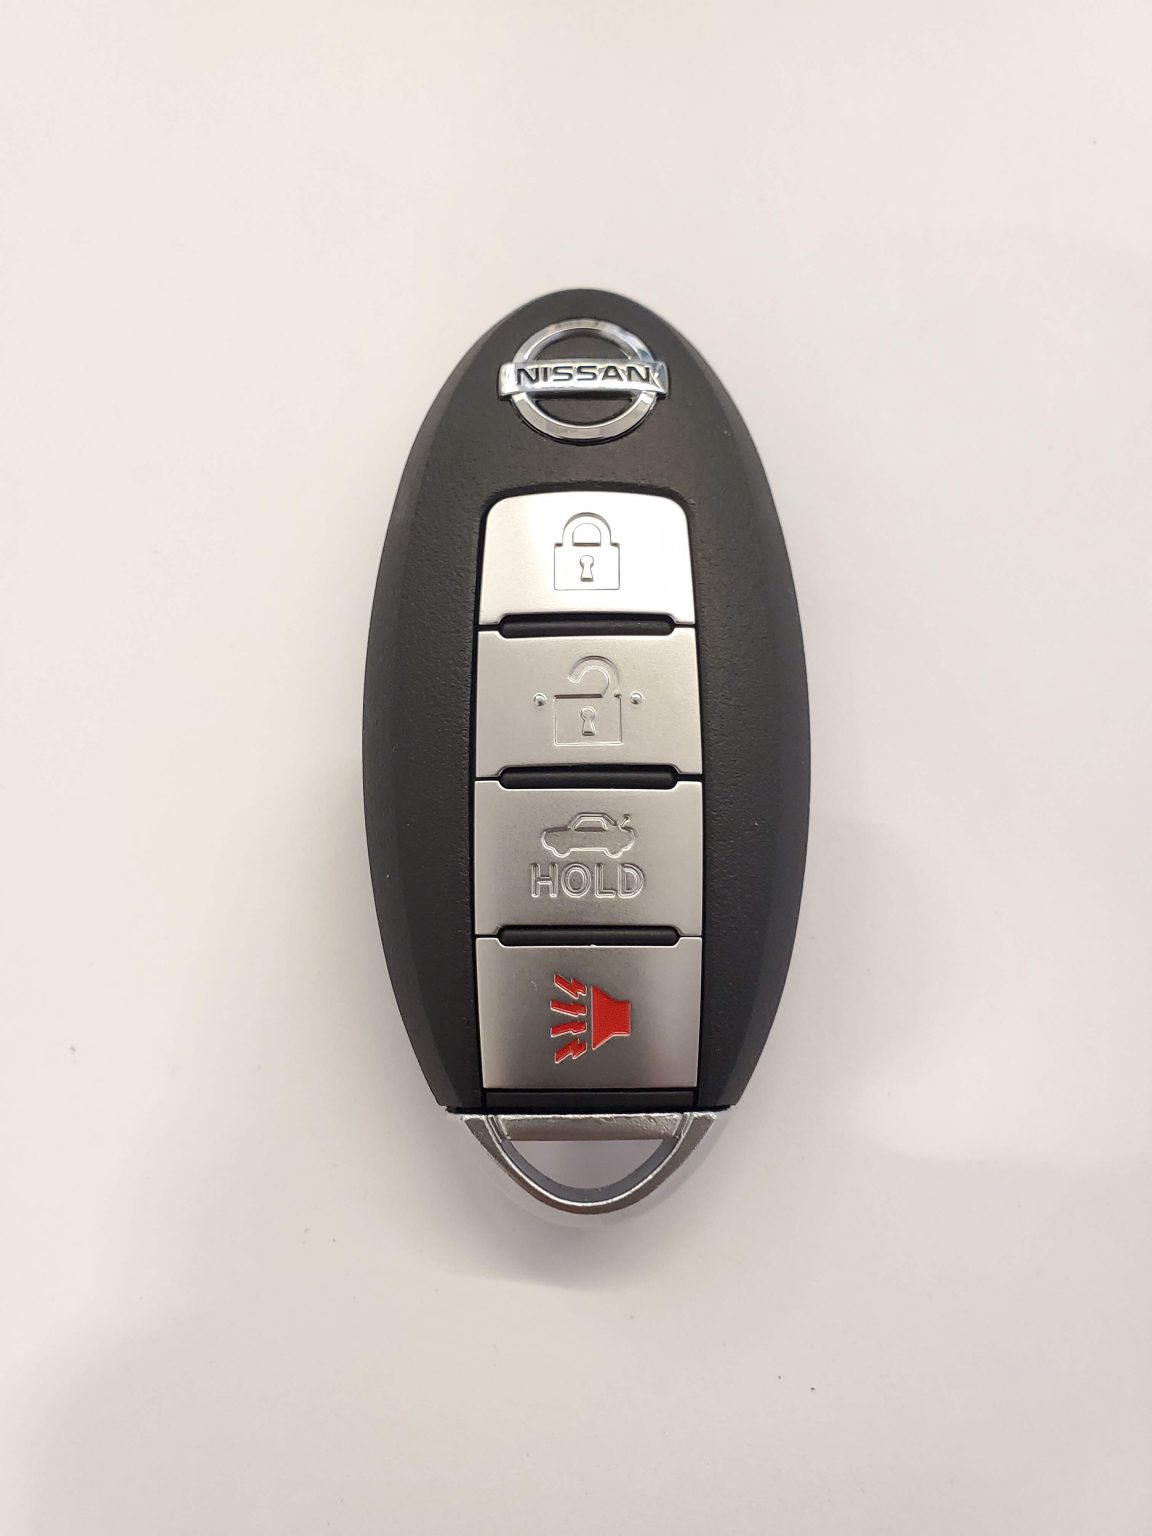 Lost Nissan Key Replacement - What To Do, Options, Costs, Tips & More